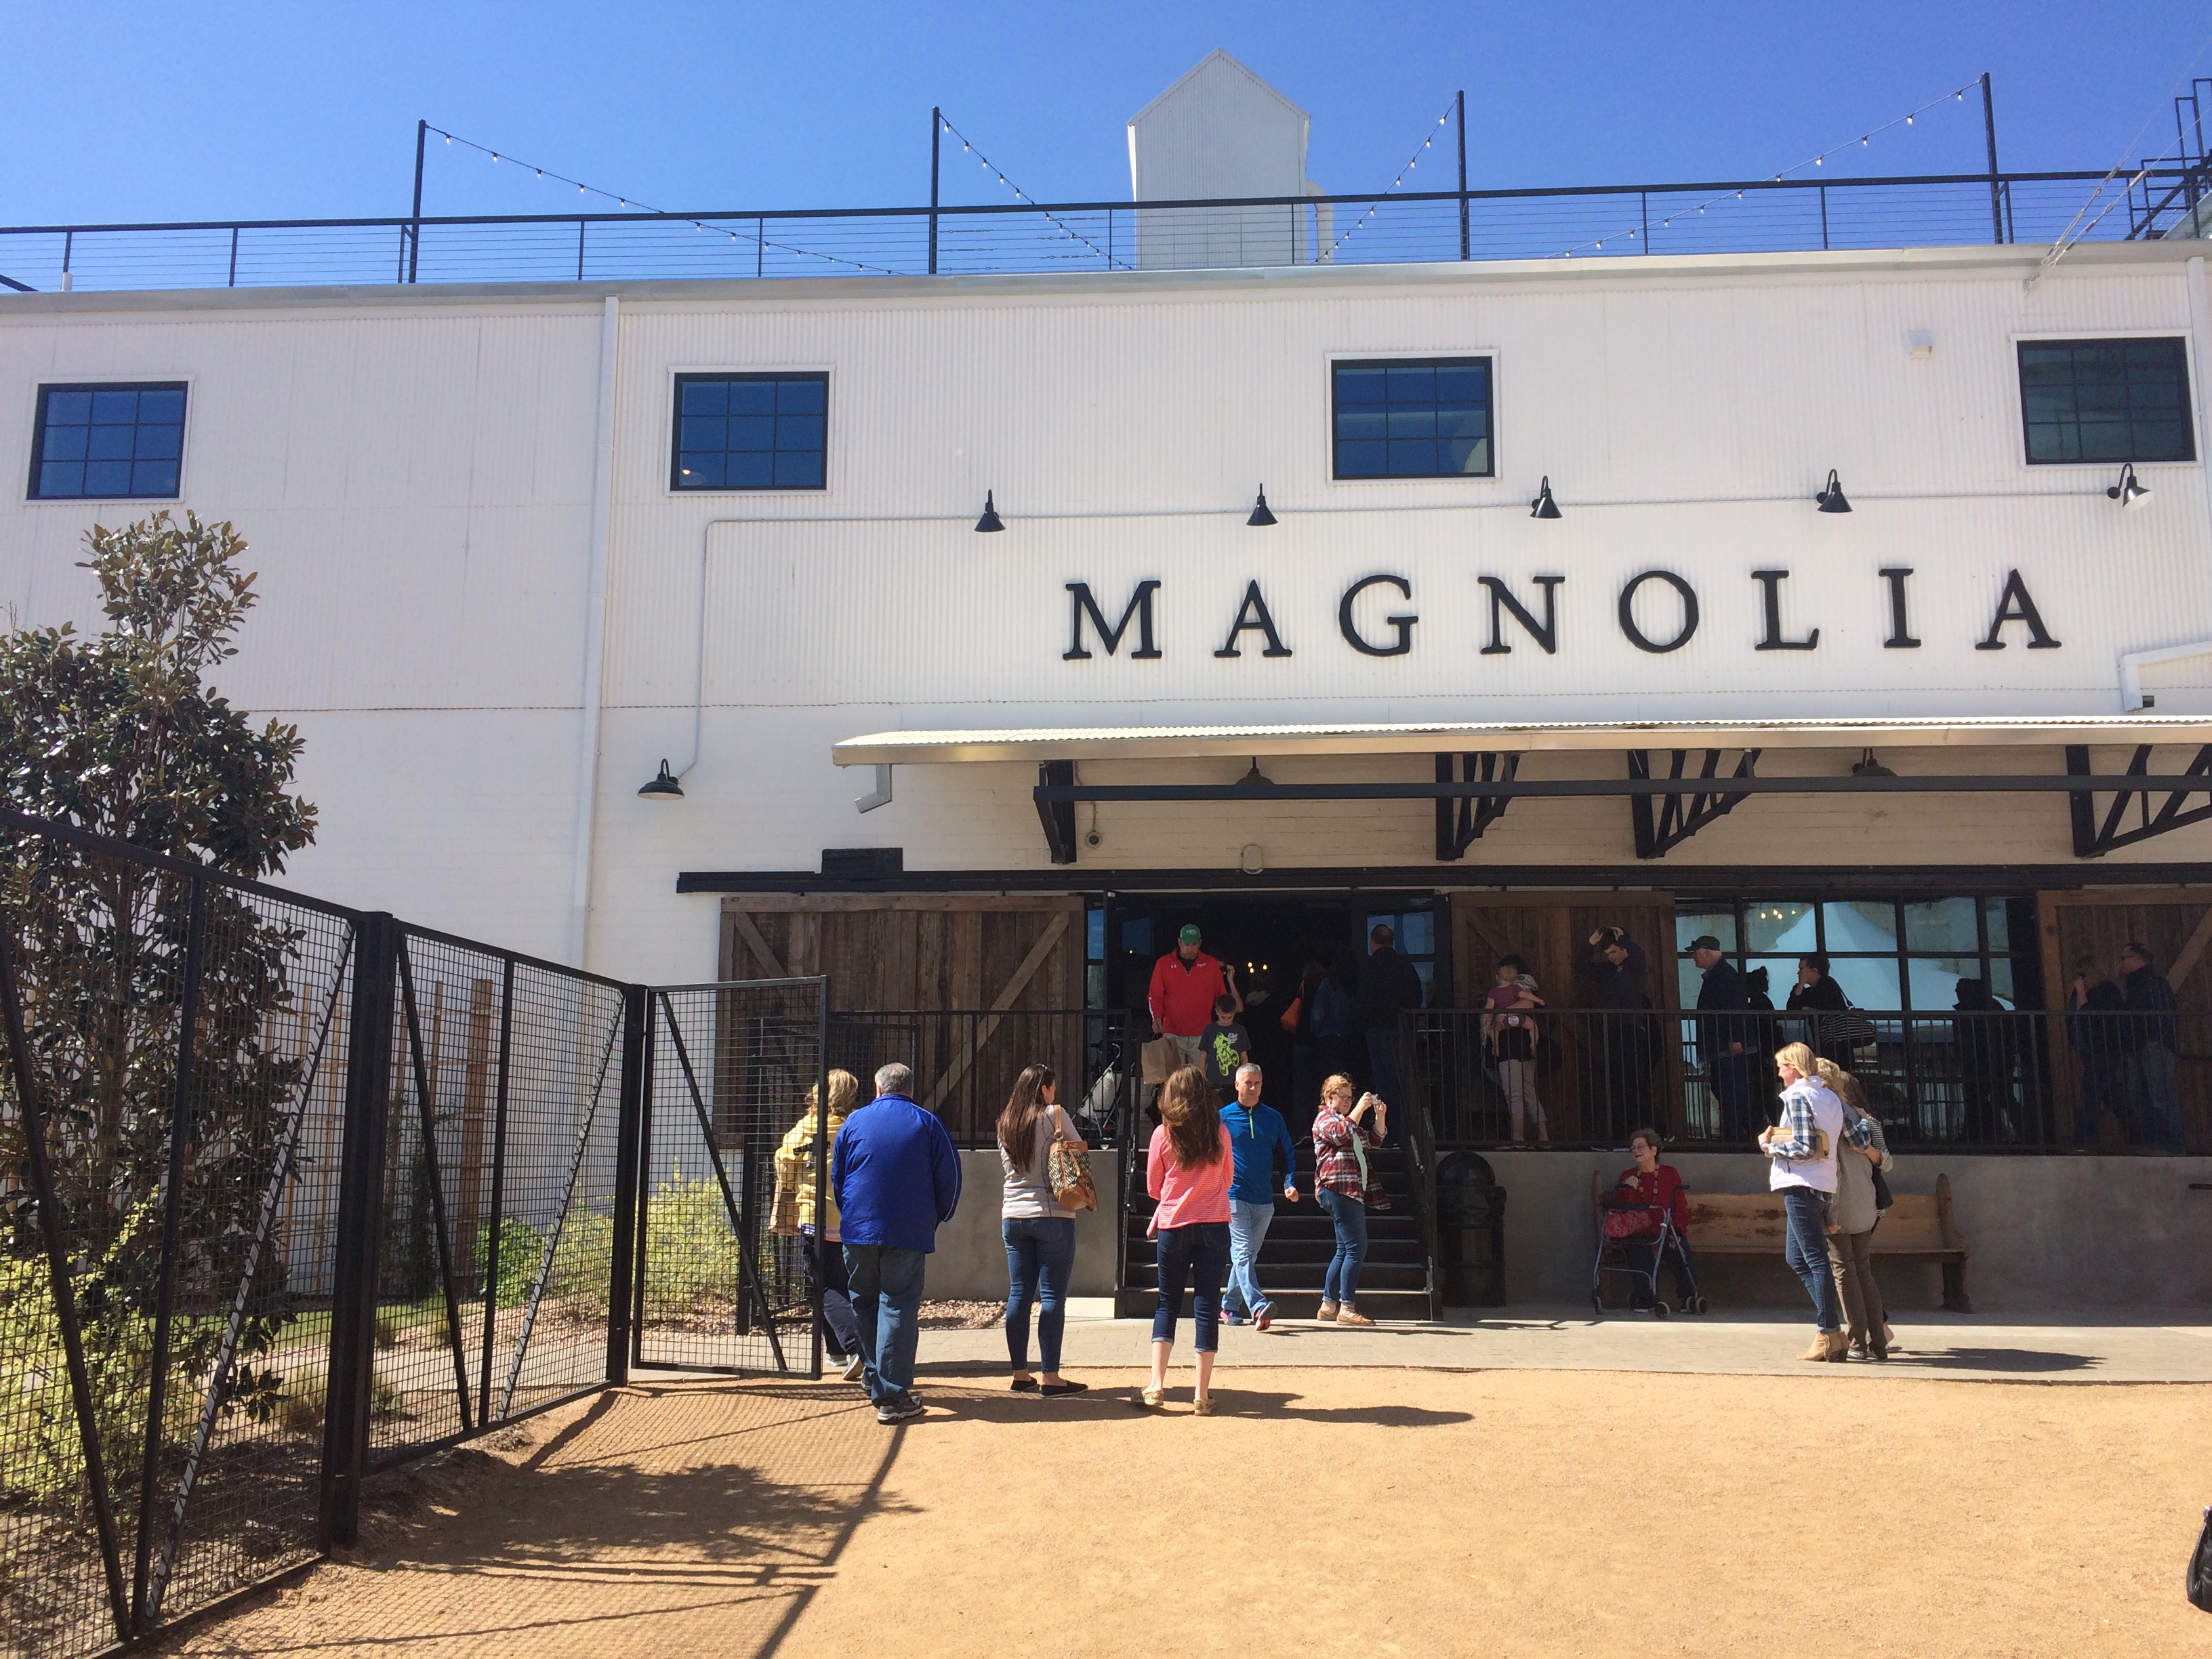 Restaurants to Go to After Your Magnolia Market Visit